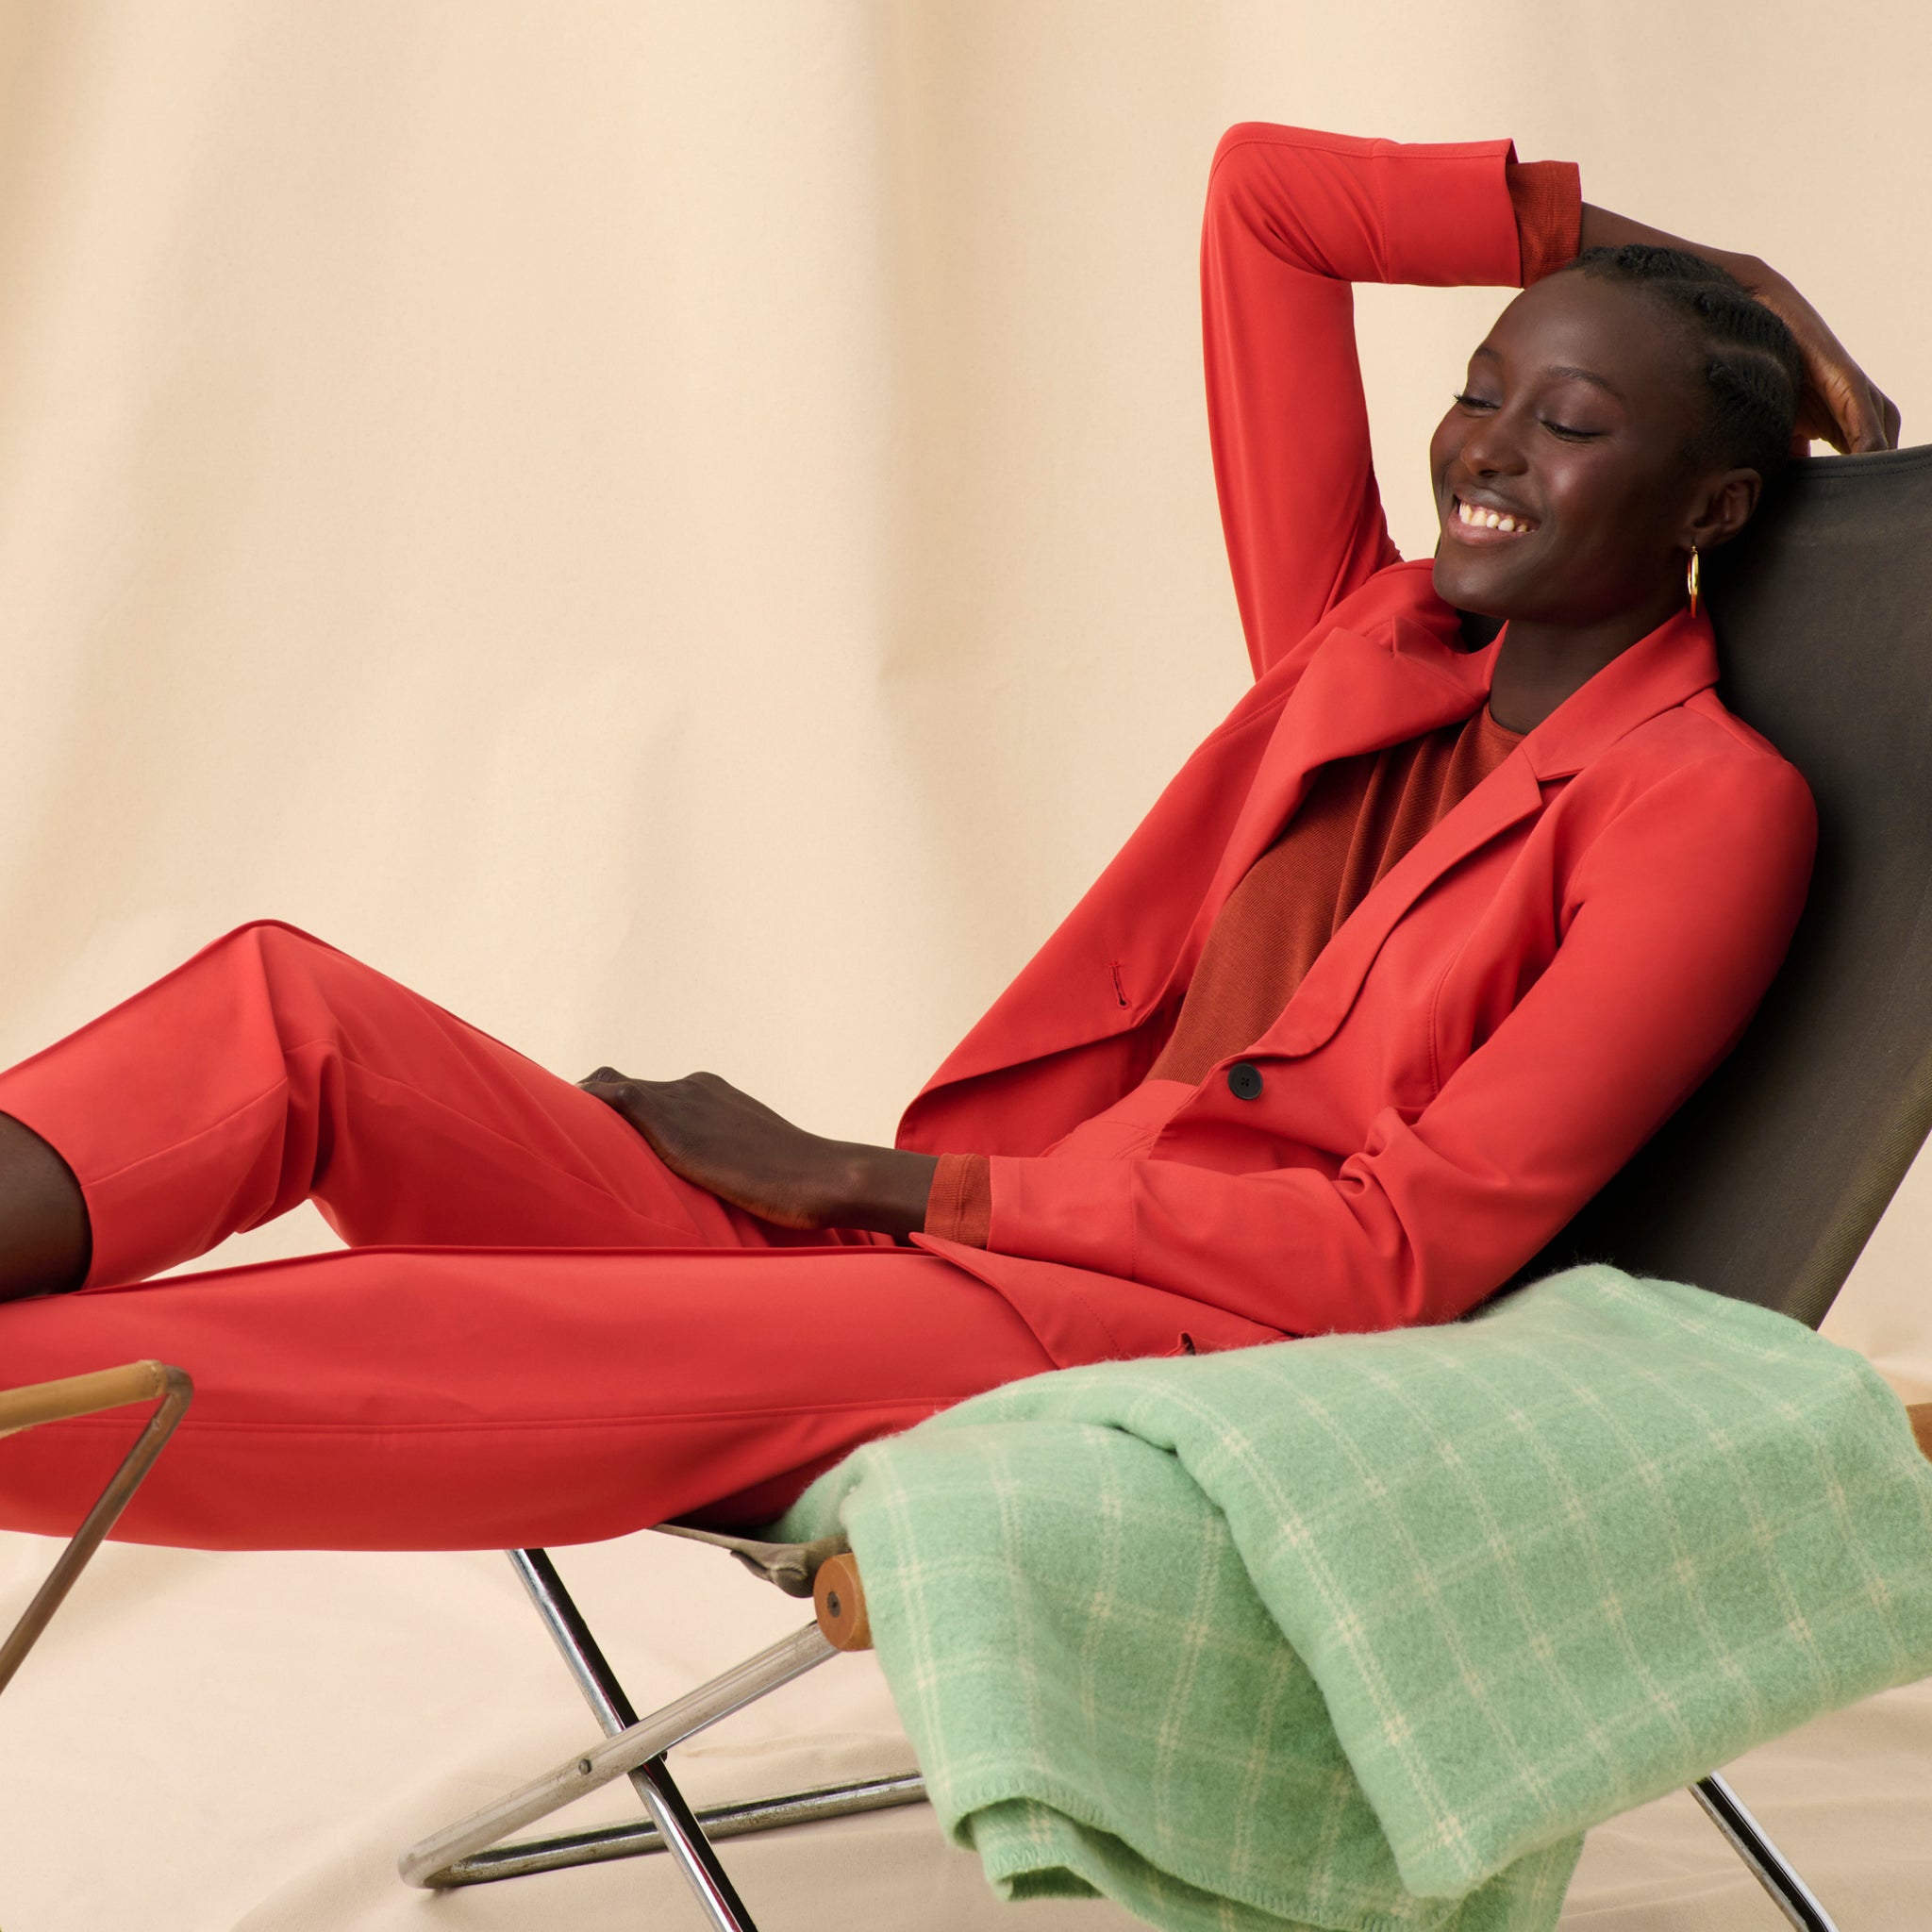 Front image of a woman wearing the Moreland Jacket in Blood Orange